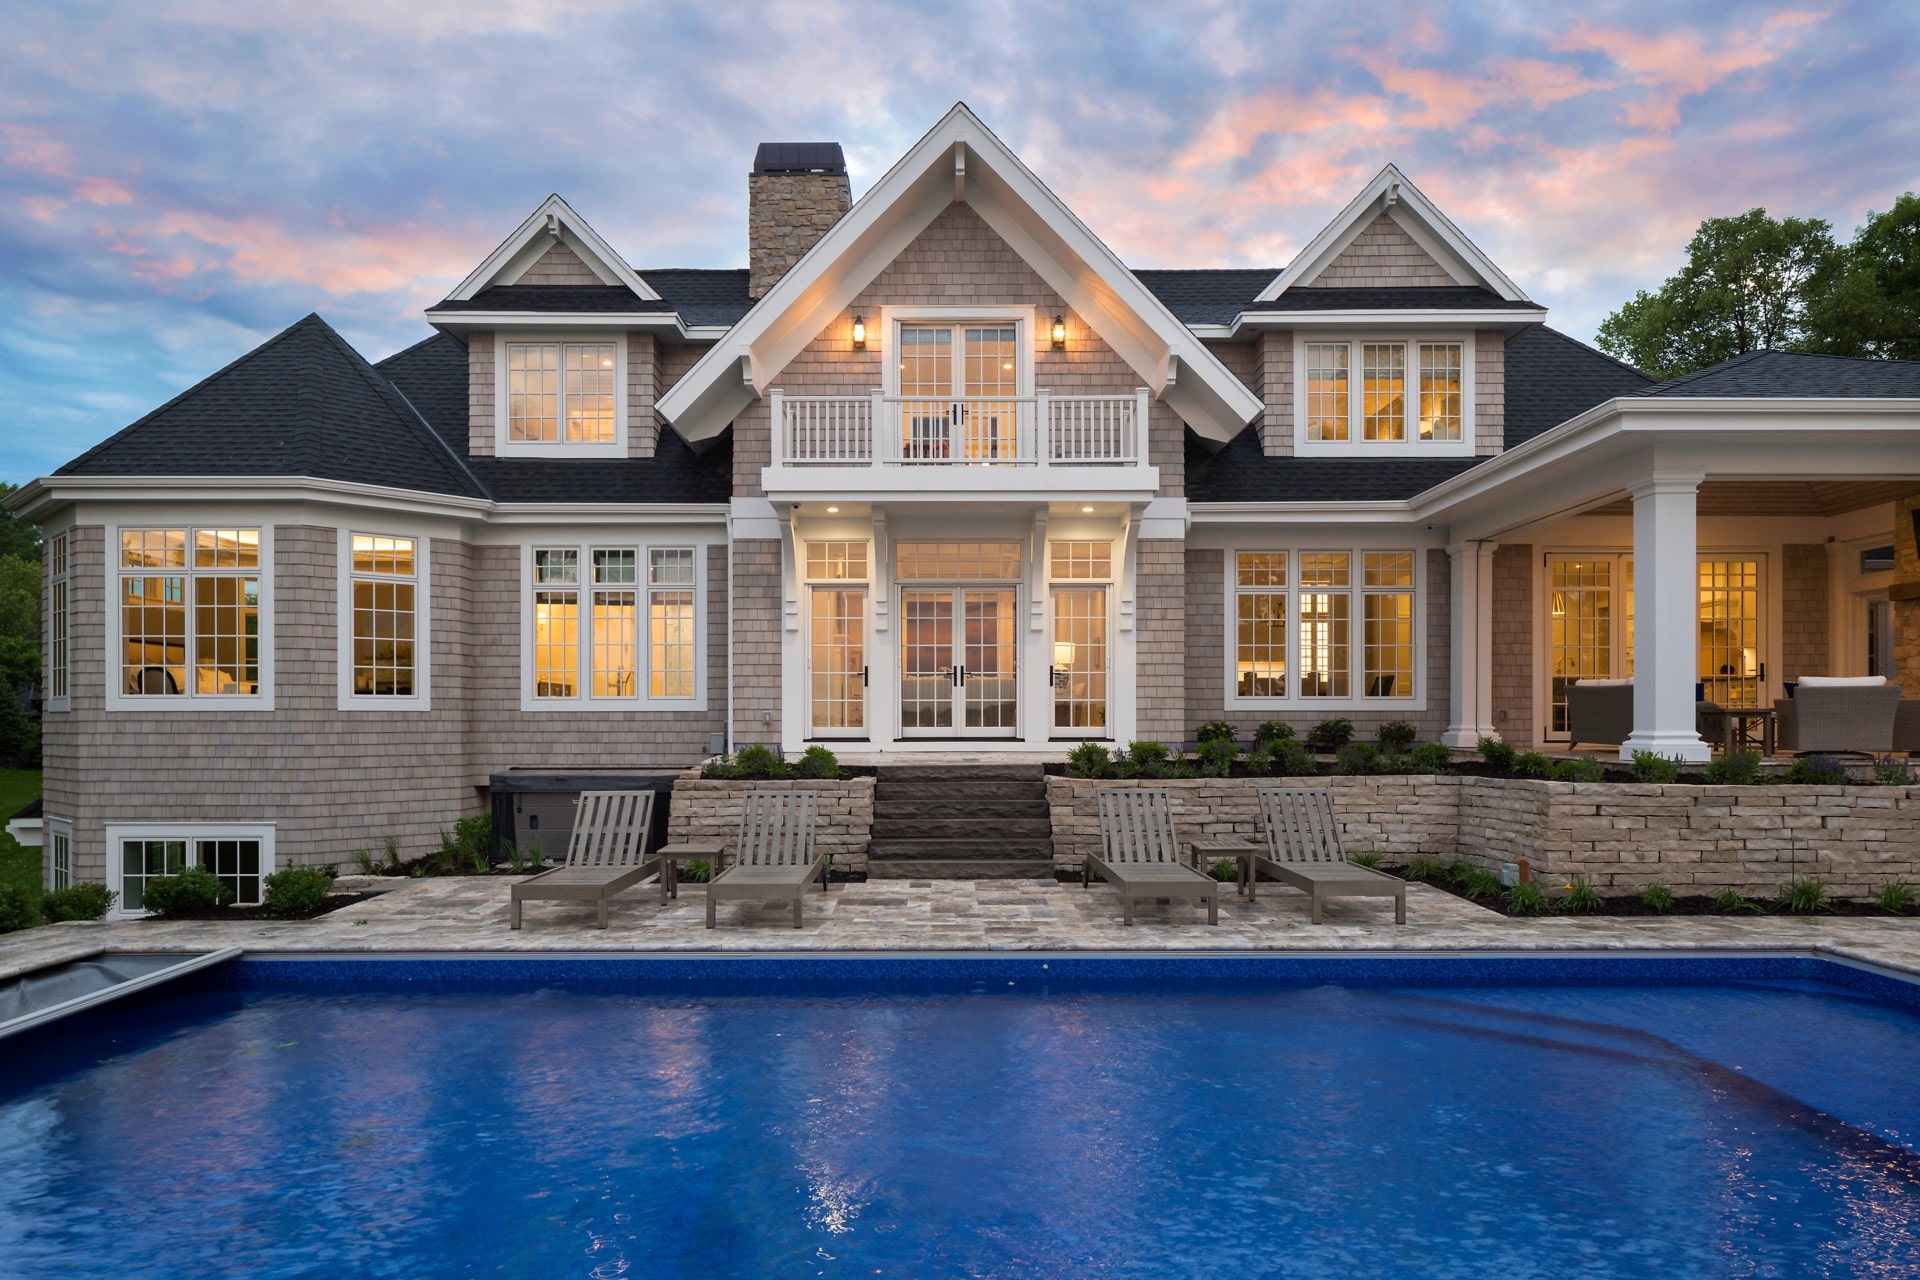 A Gordon James luxury custom built home with an outdoor pool in Minnesota.